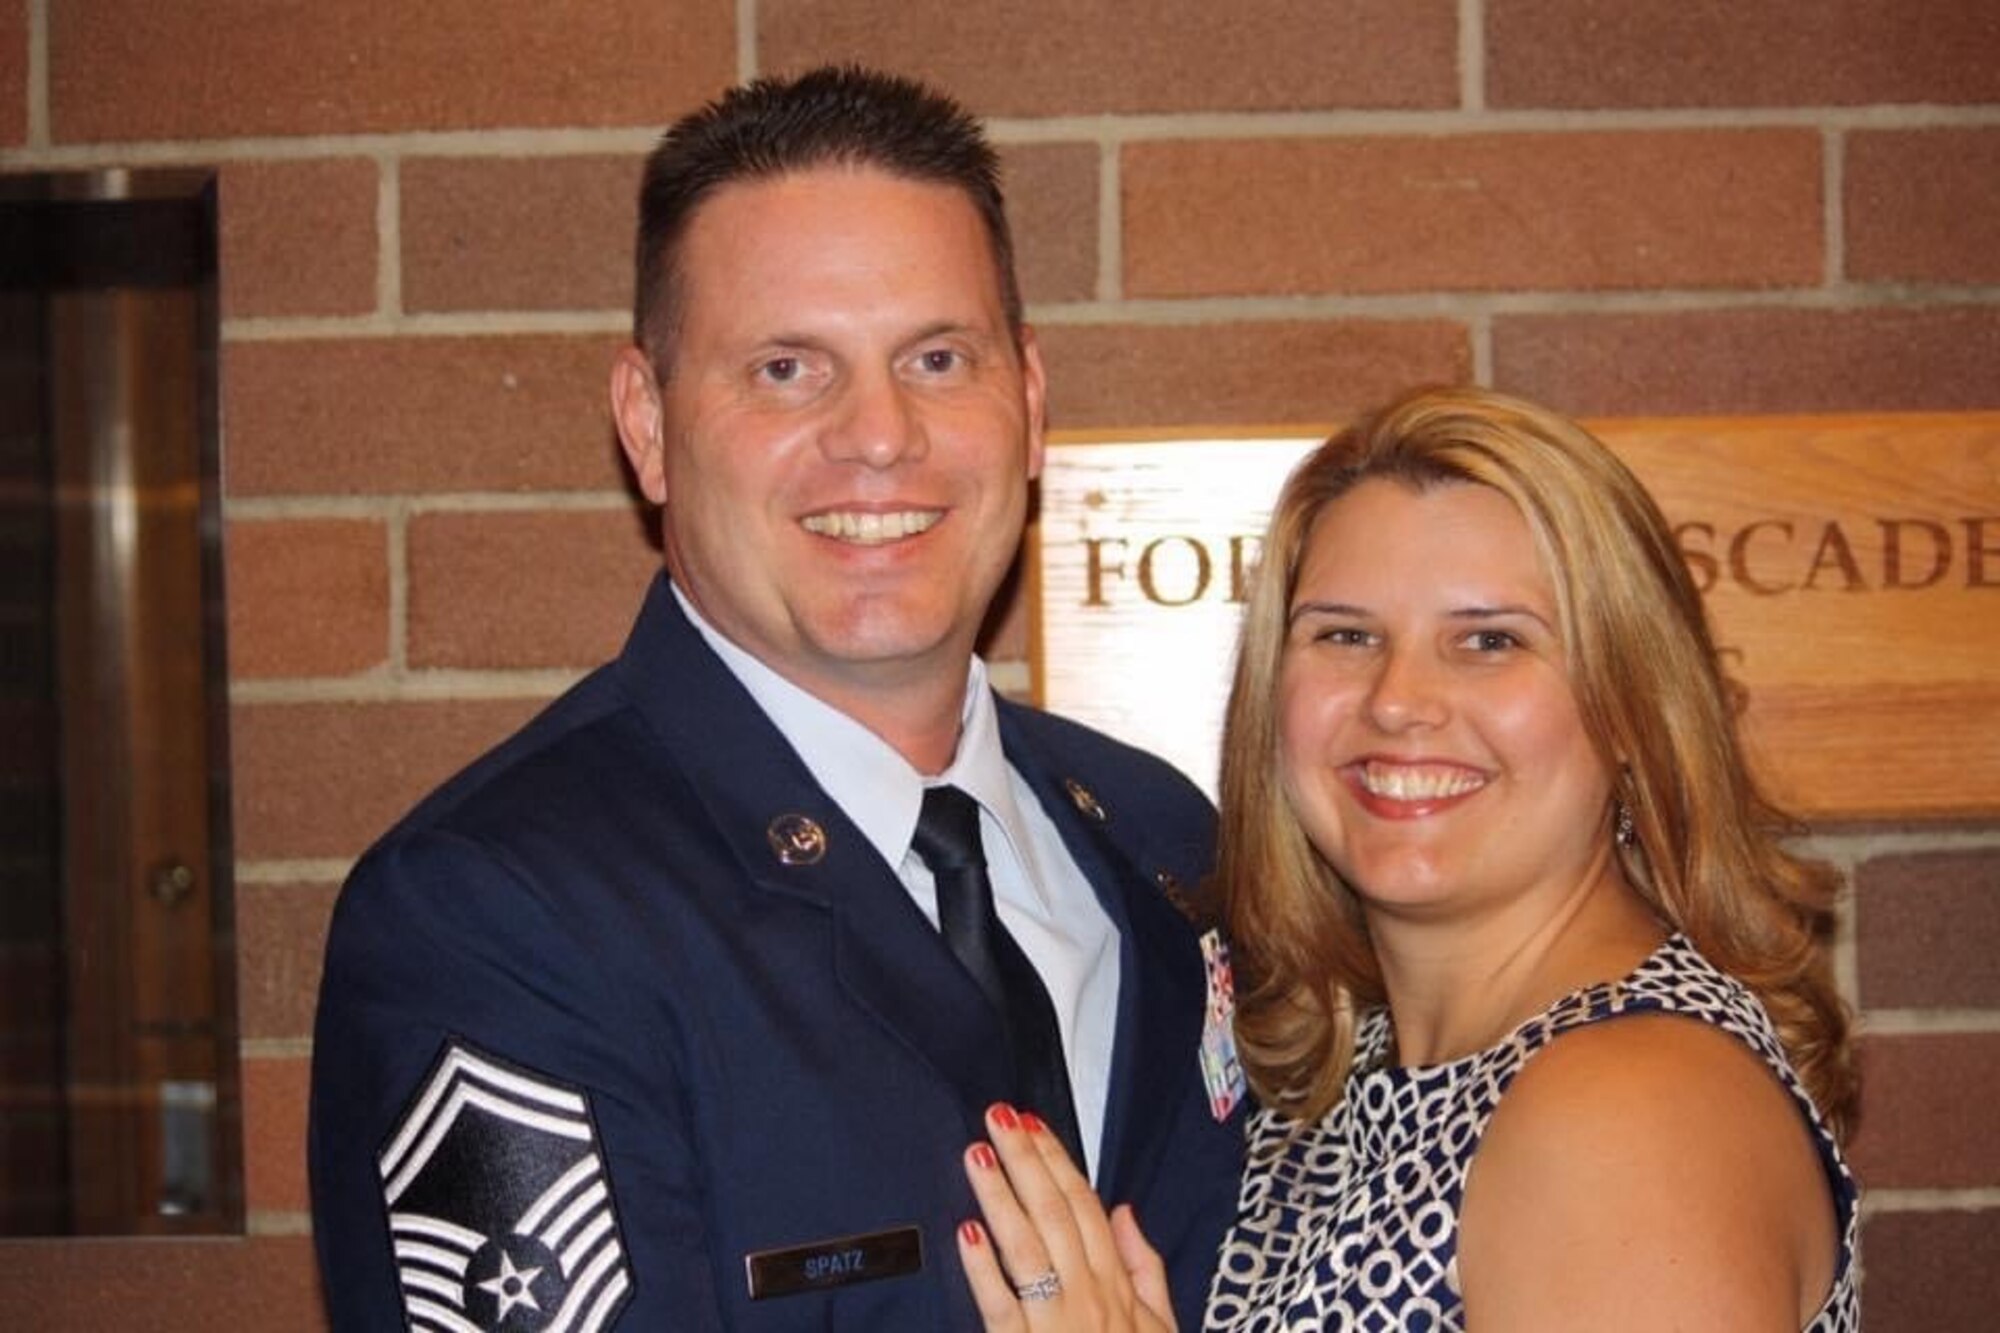 U.S. Air Force Senior Master Sgt. Carl Joseph “CJ” Spatz III, air traffic controller and facility manager, poses for a photo with his wife, Angela Spatz, during his retirement day at Joint Base Lewis-McChord, Wash., Sept. 11, 2015. (Courtesy photo)